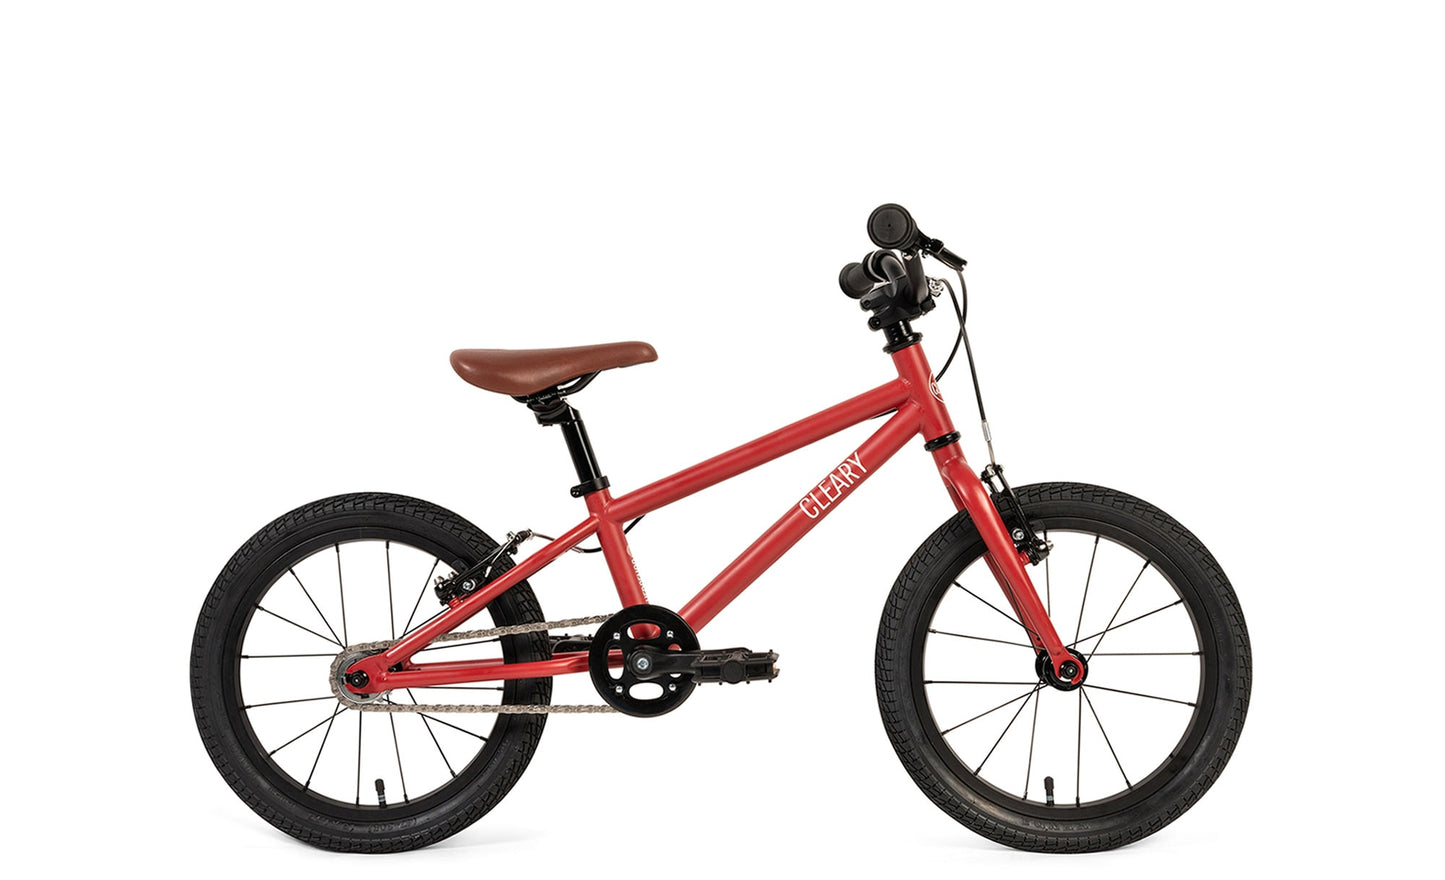 16" Cleary children single speed bike in the color red.